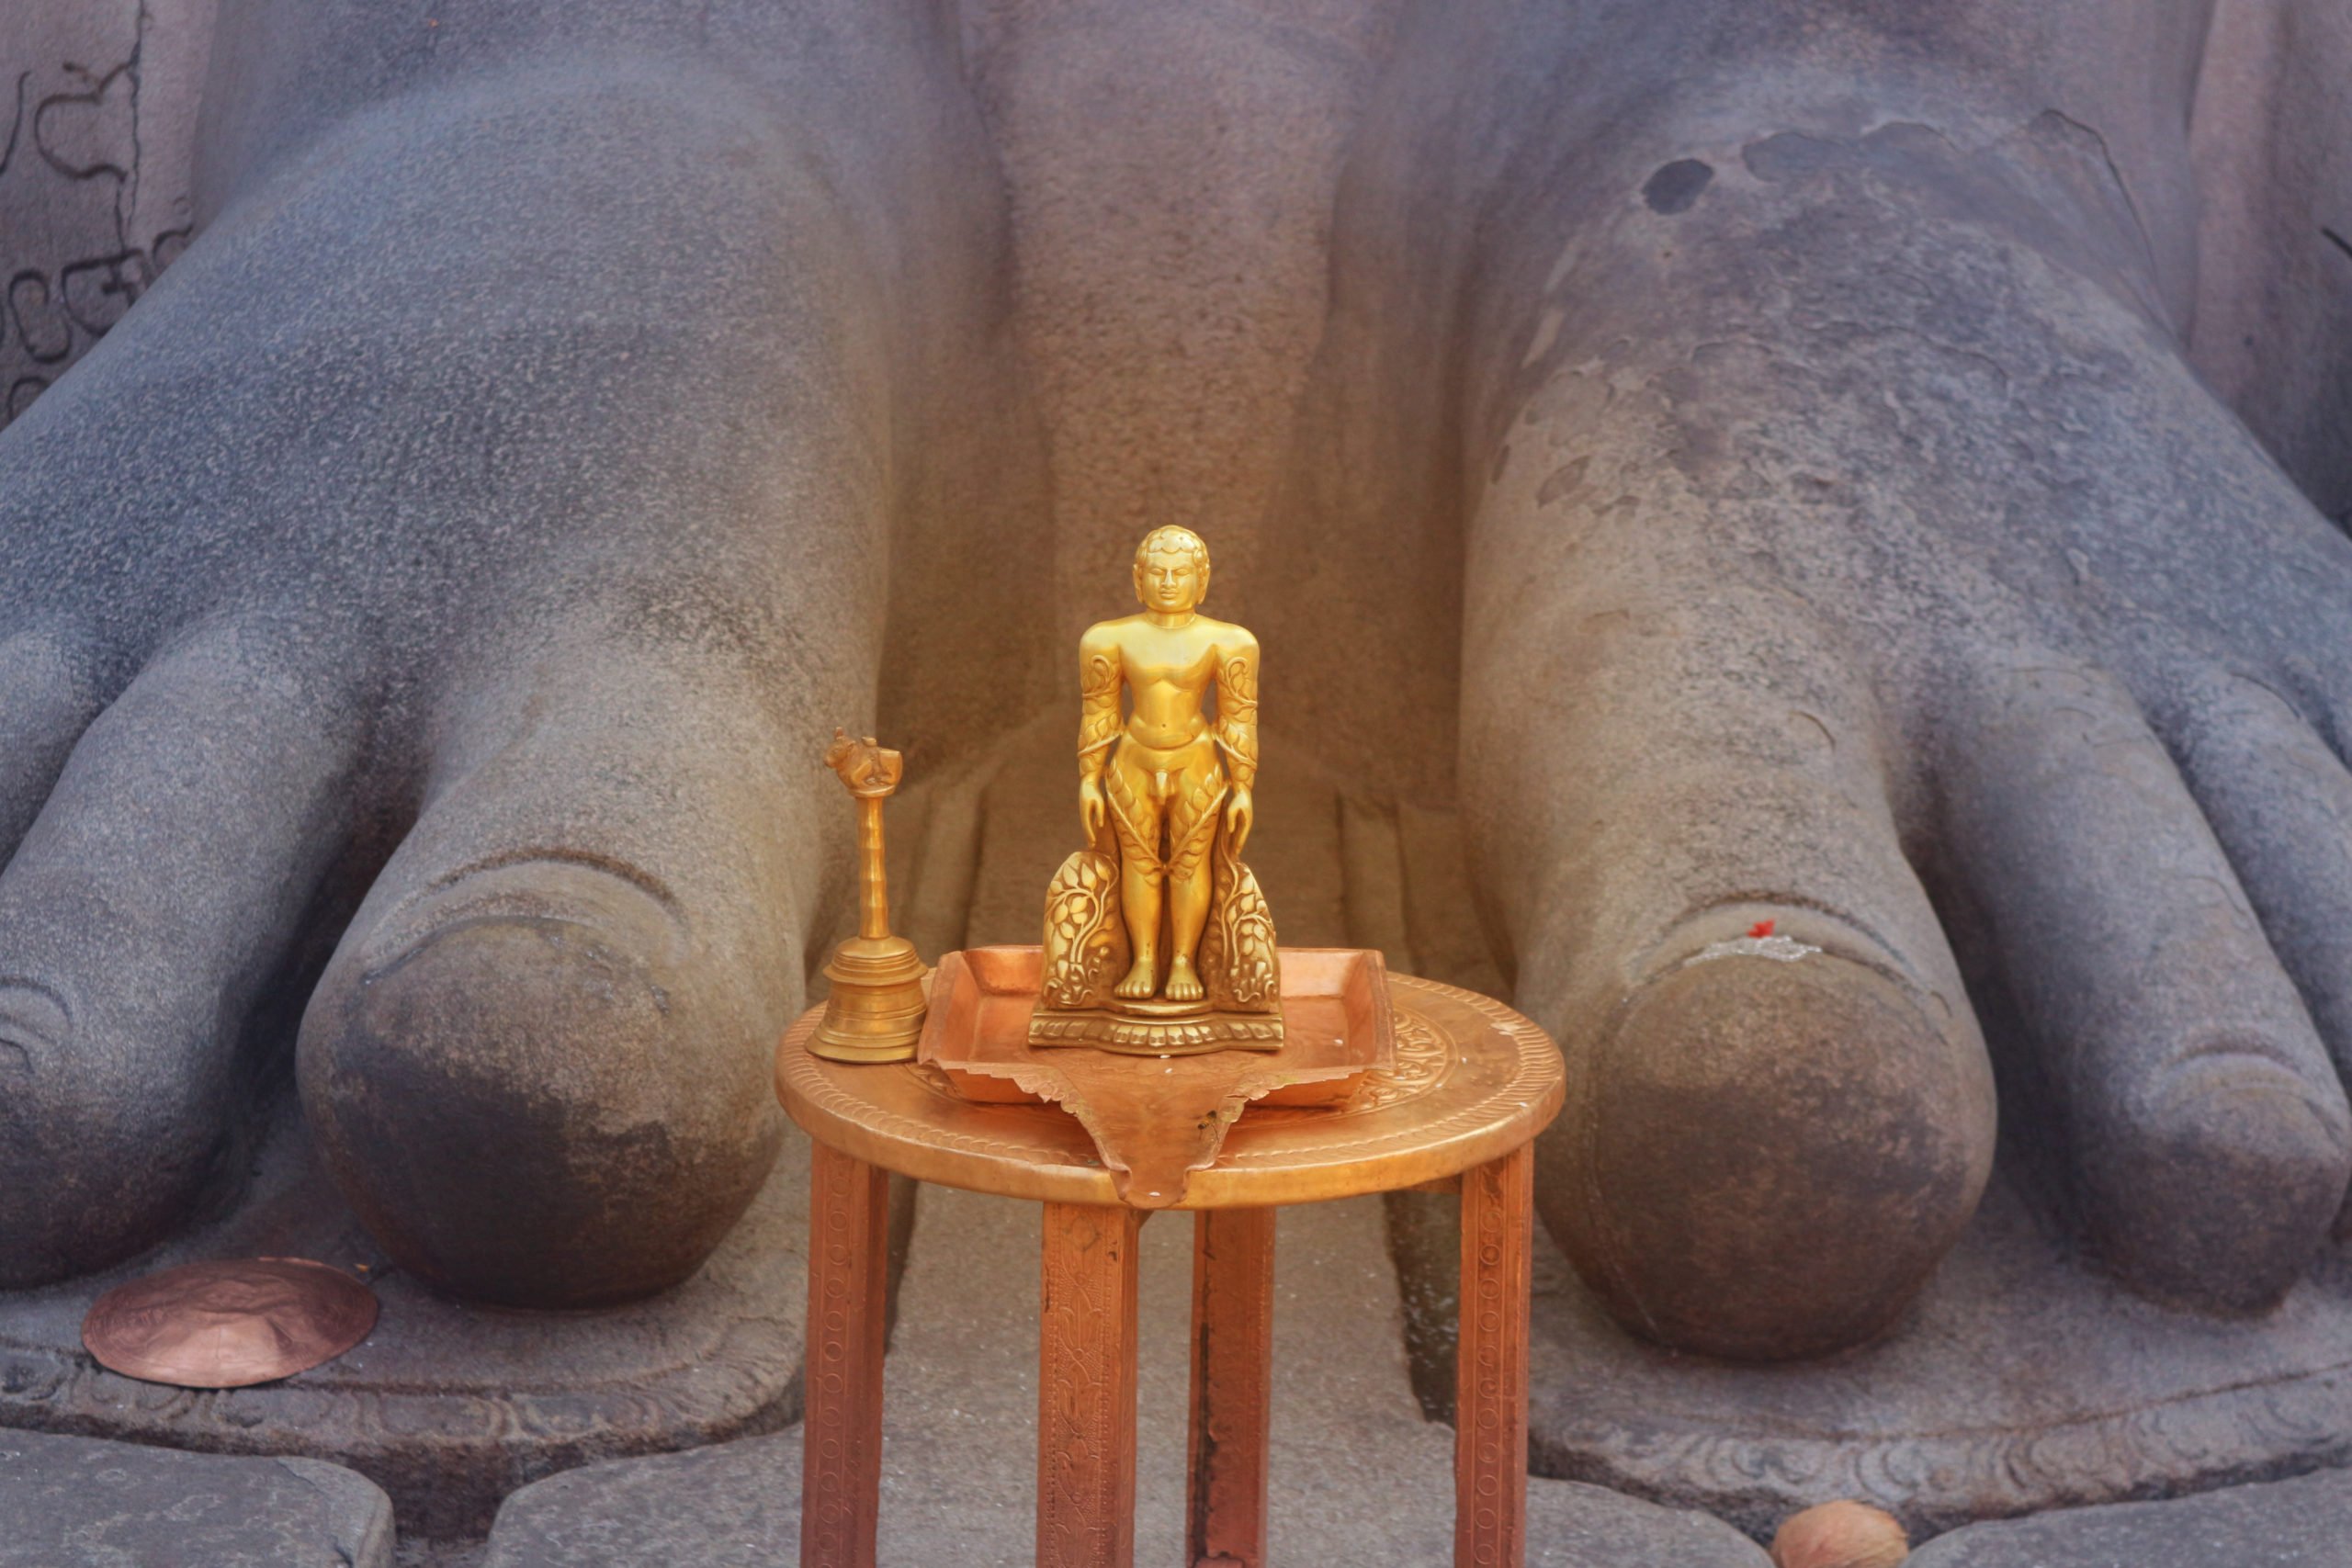 Get A Rare Glimpse Of Figurines Of The 24 Tirtankaras Of Jainism In Our Tour To The World's Tallest Monolithic Statue At Shravanabelagola